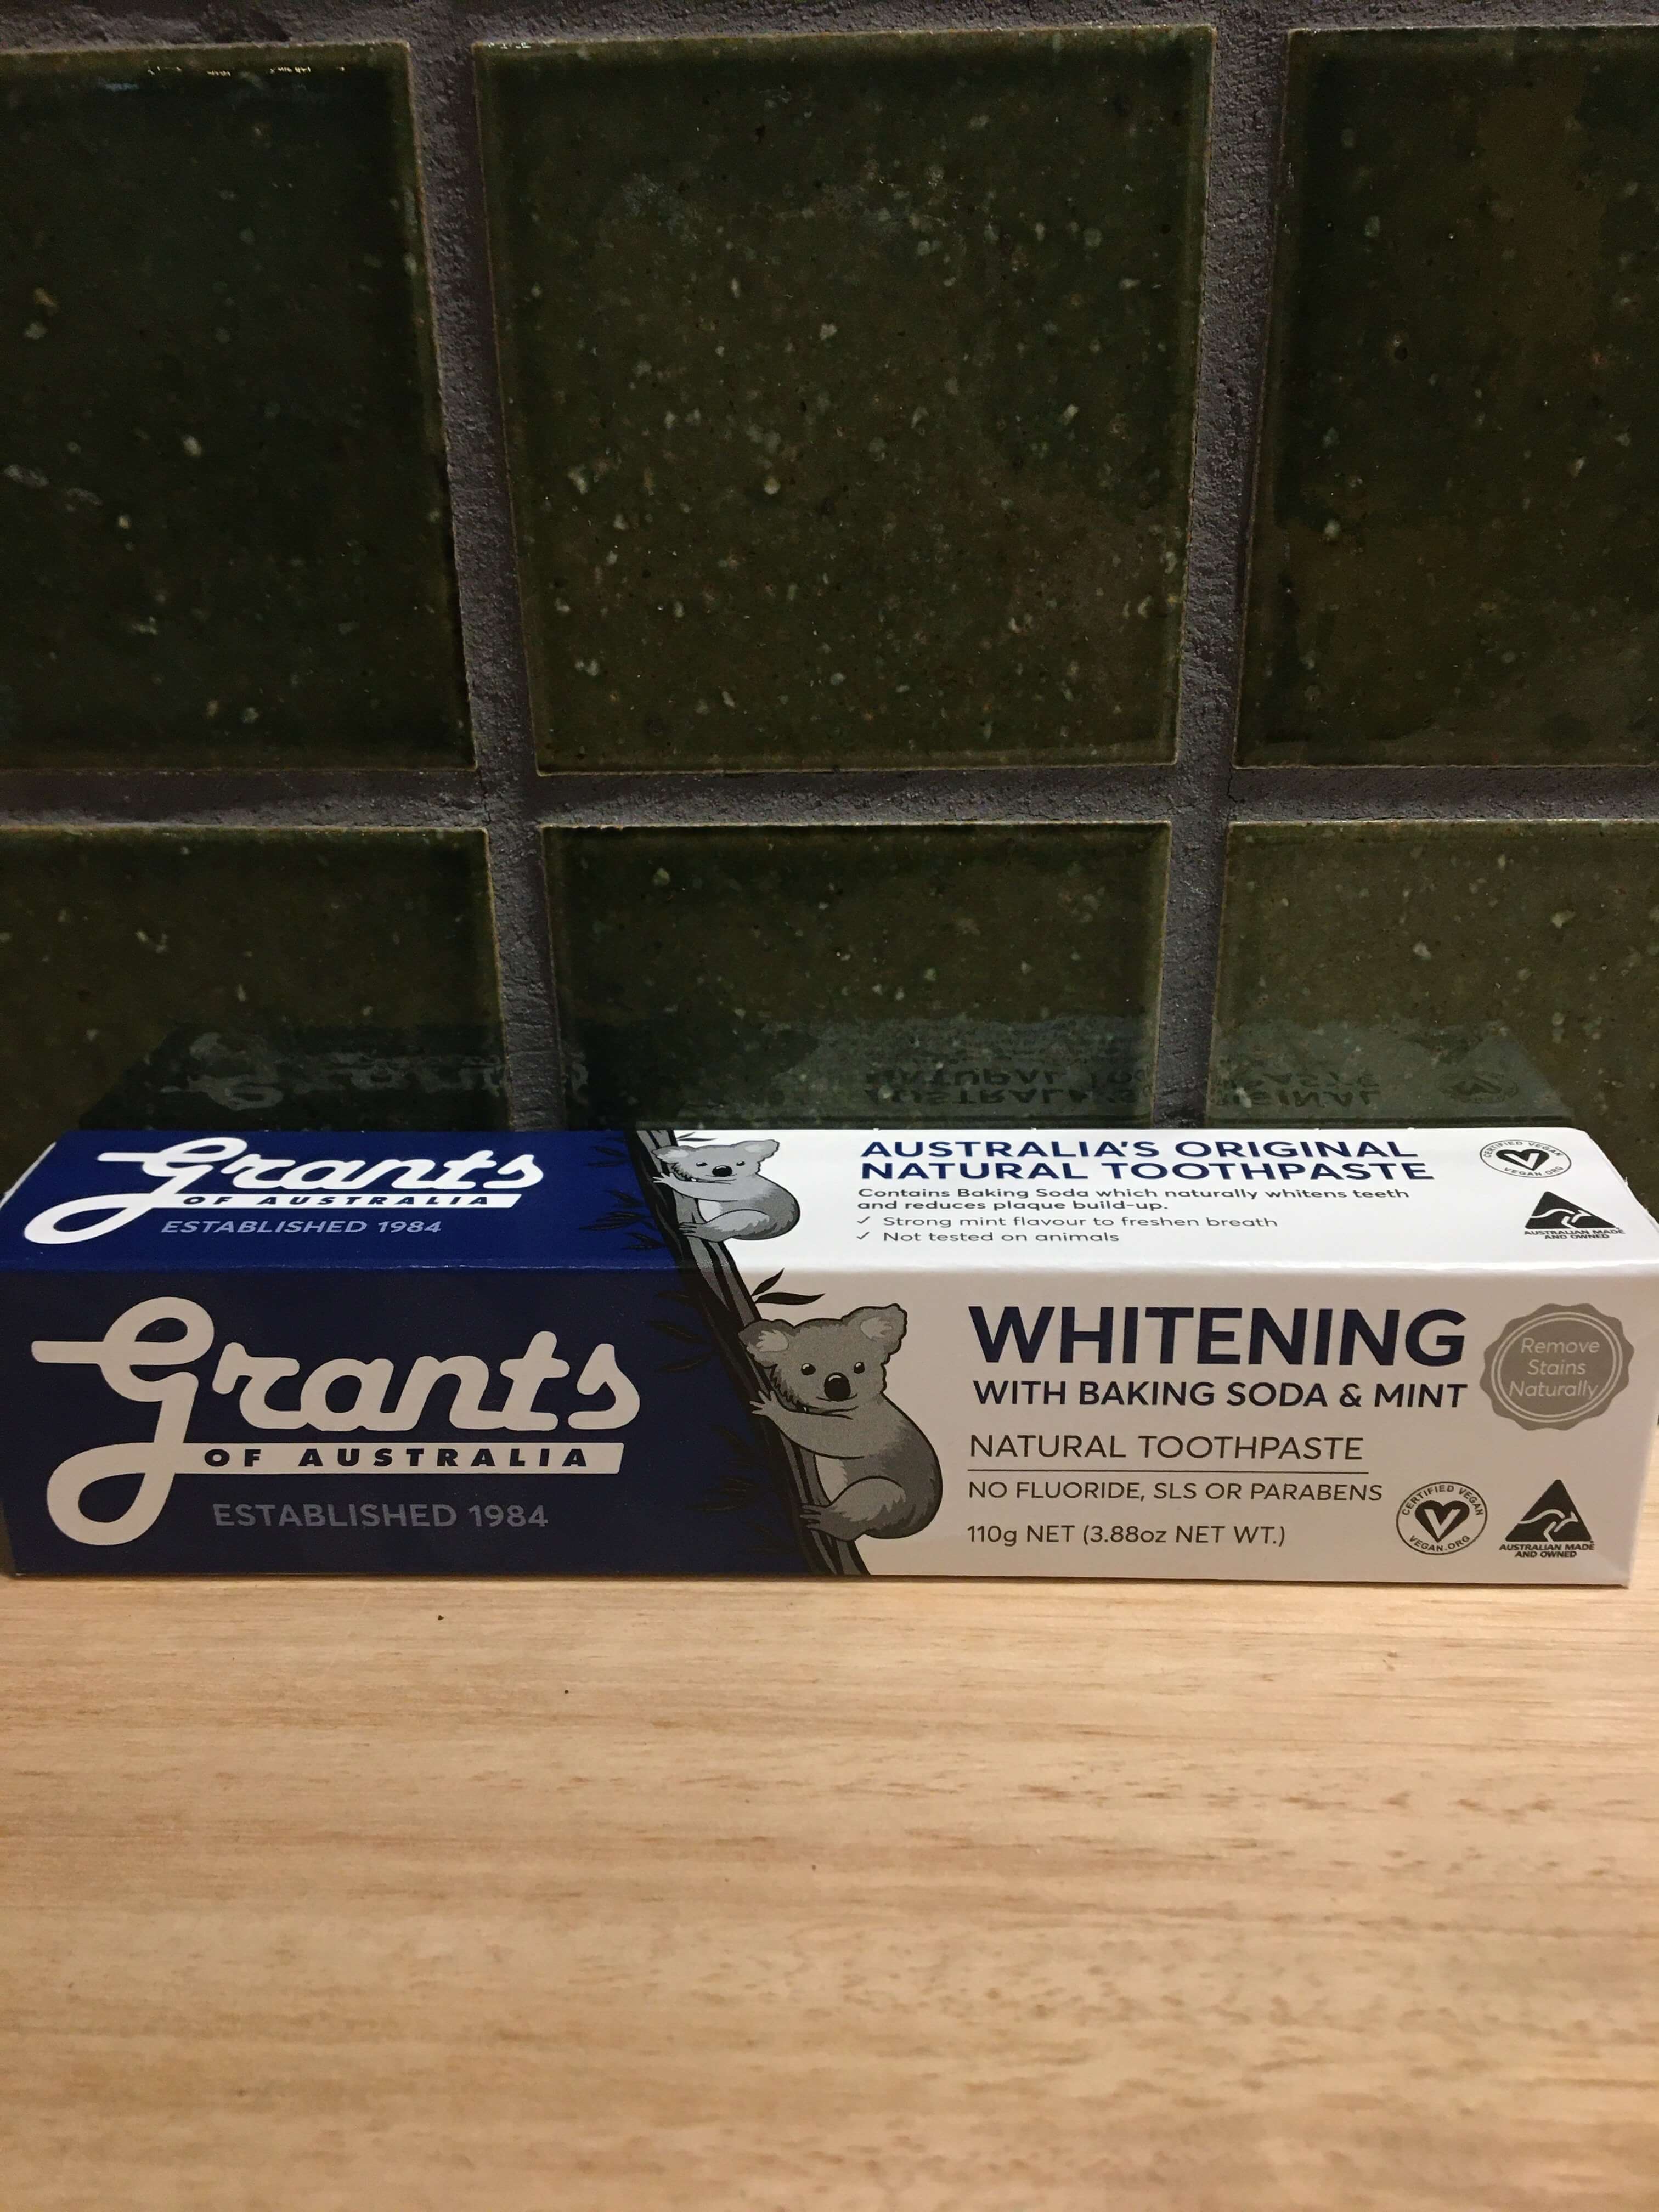 Grants of Australia Whitening with Baking Soda and Mint